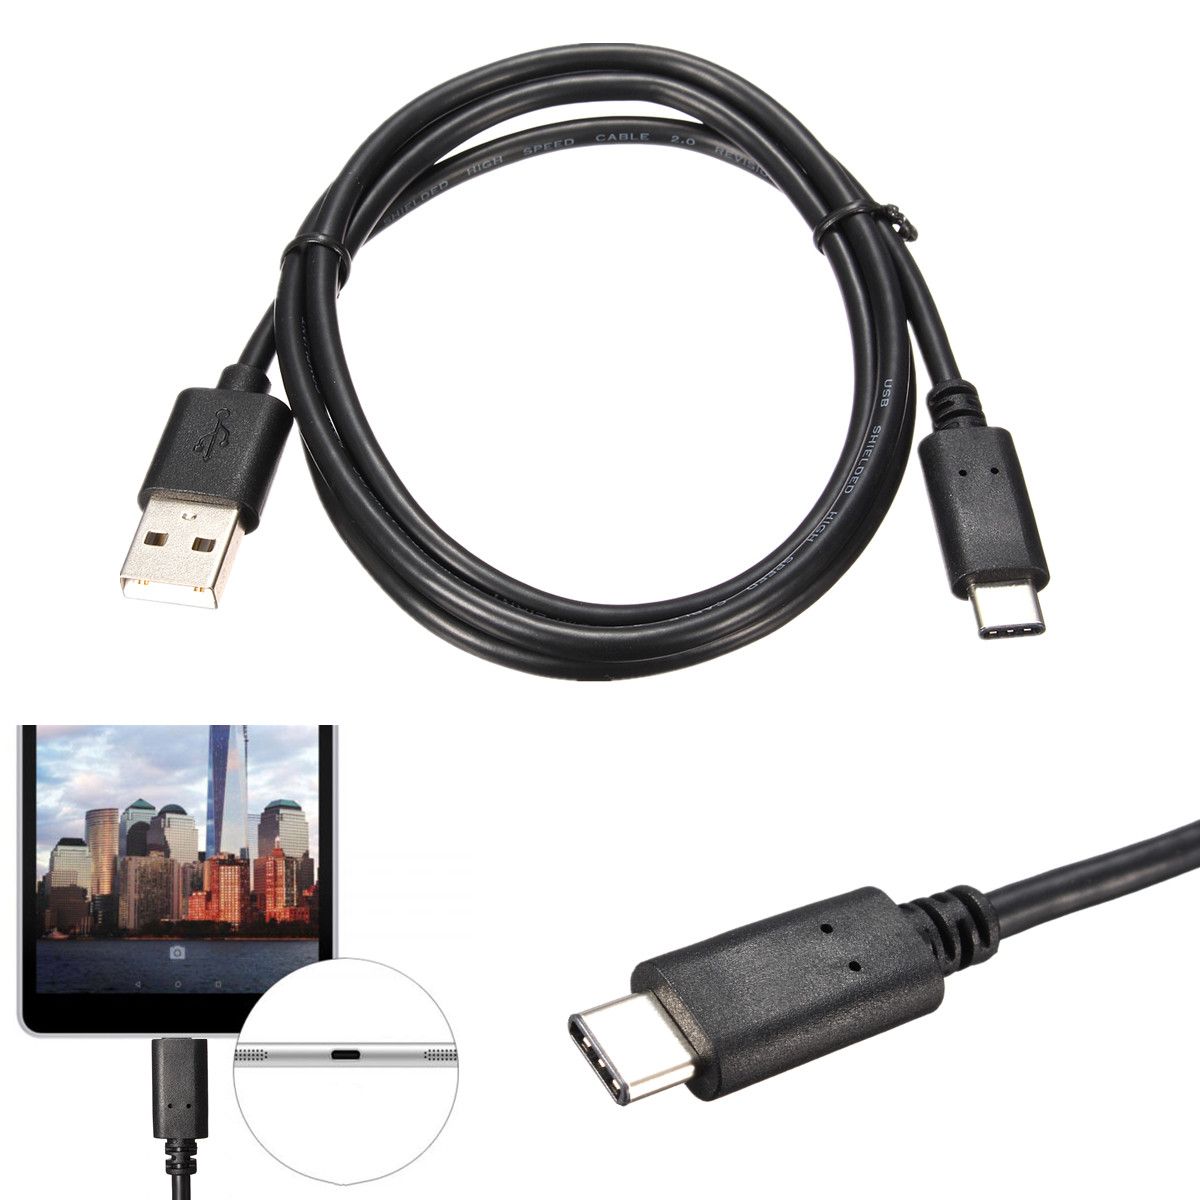 USB-31-Type-C-Male-Connector-to-USB20-A-Male-Data-Cable-Power-Charging-Cable-1633715